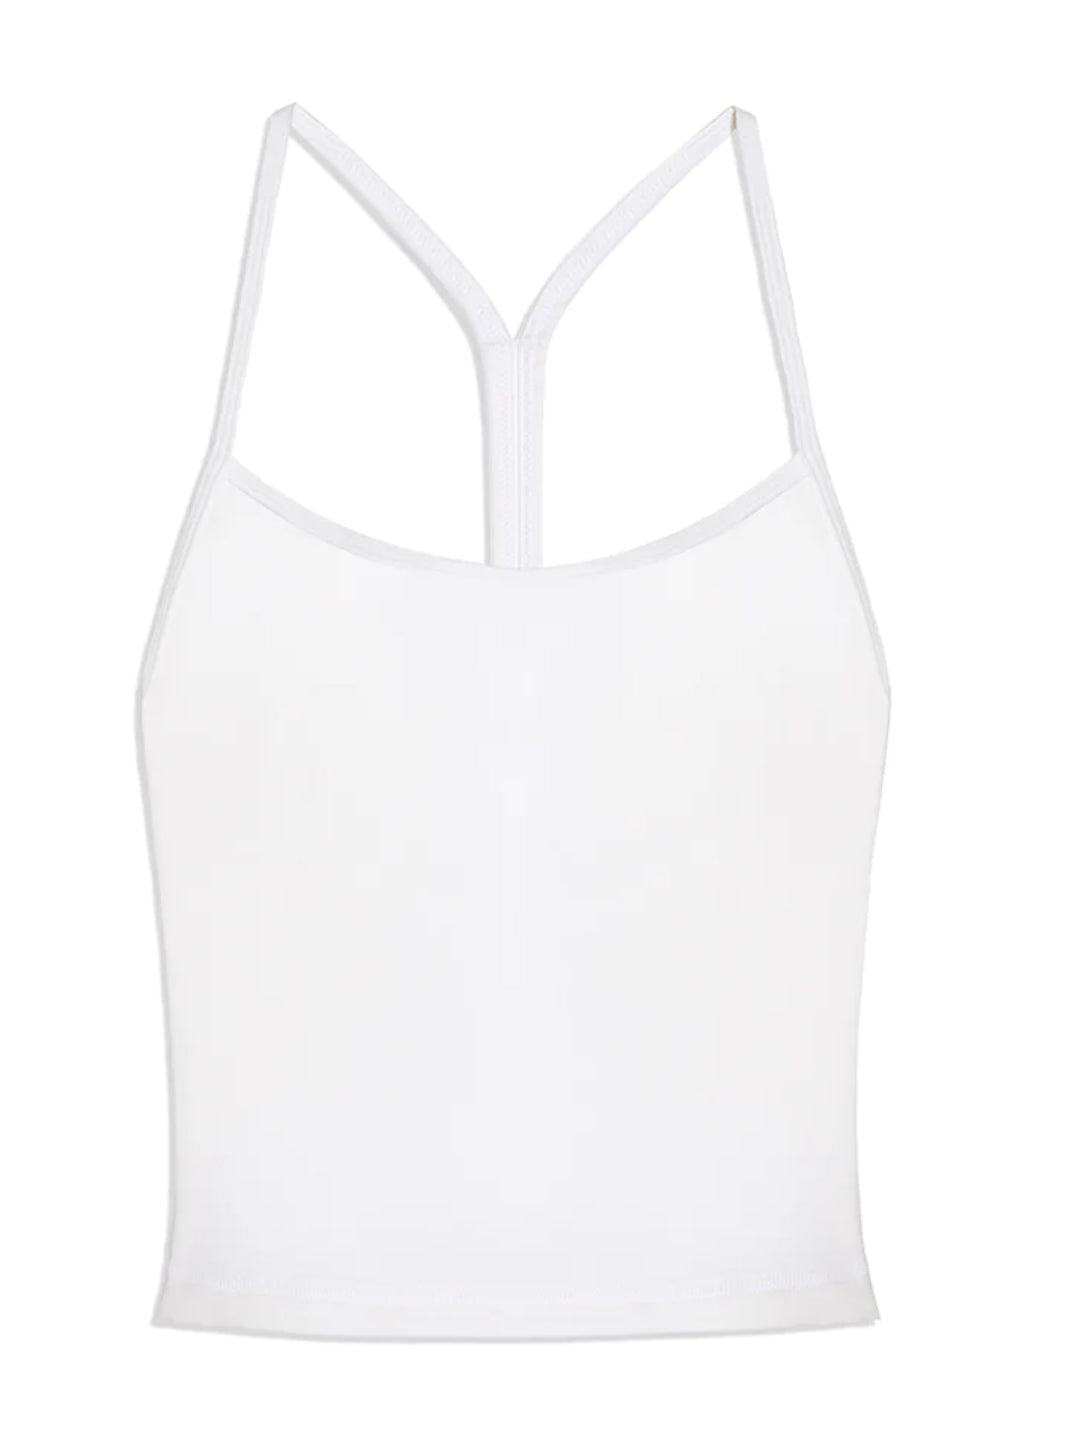 We wore what- racer back tank